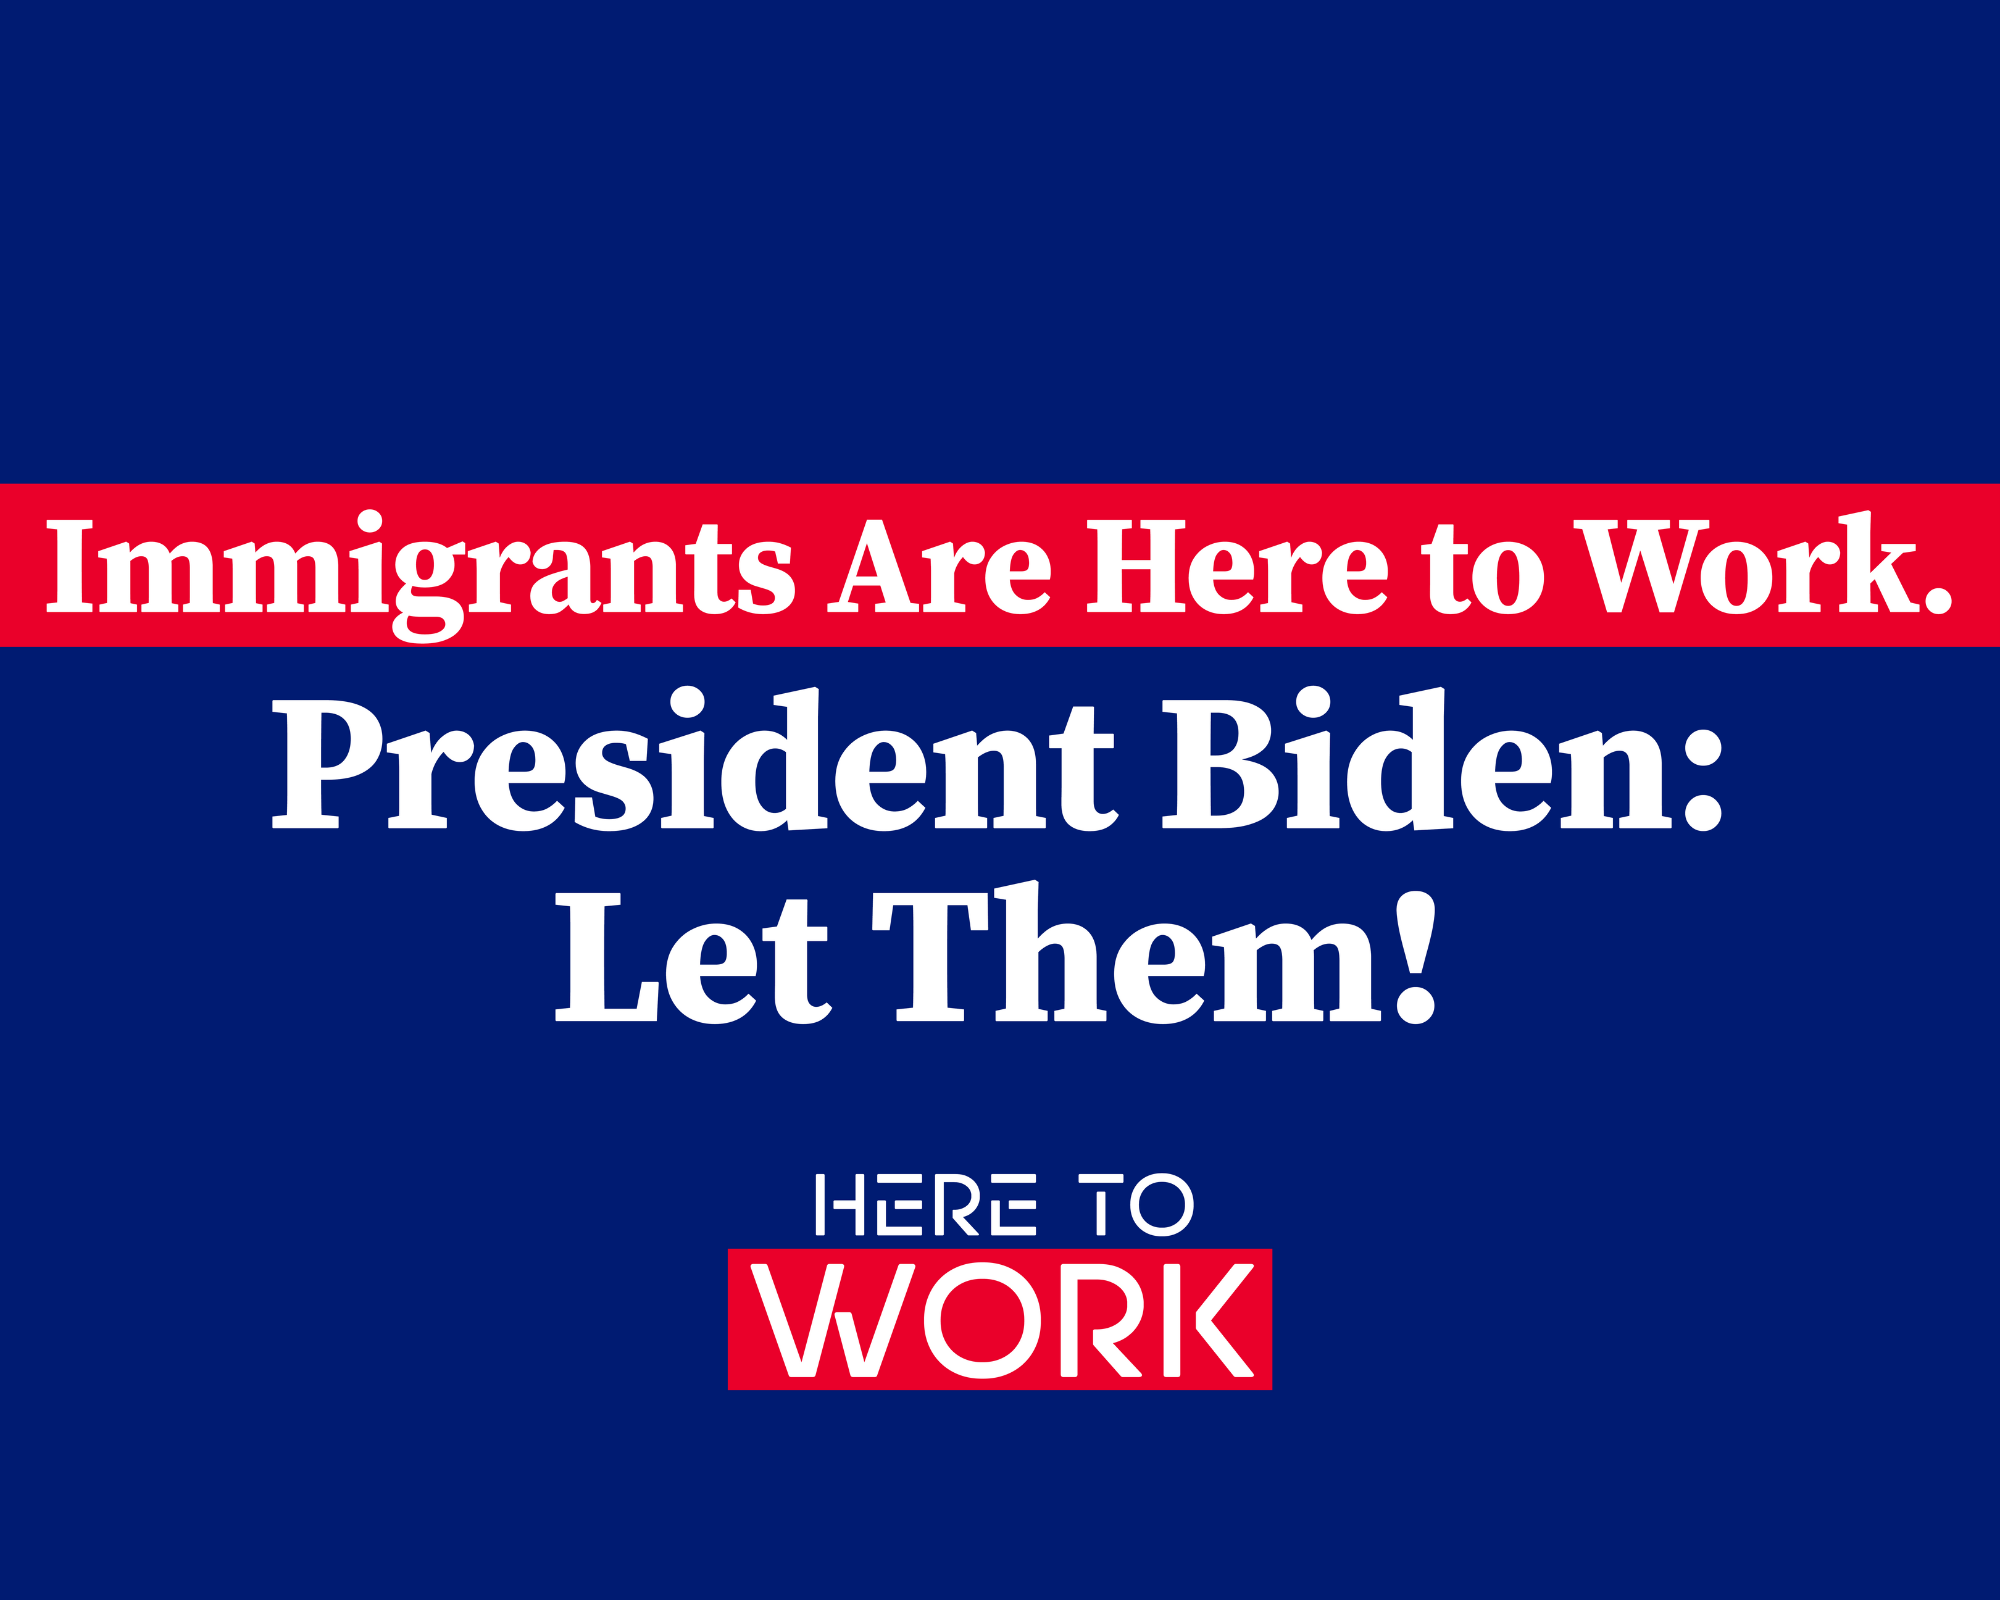 House Triangle: Rep. García (D-IL); Business, Community Leaders and Impacted Families Urge Biden to Provide Work Permits for Long-Term Immigrants